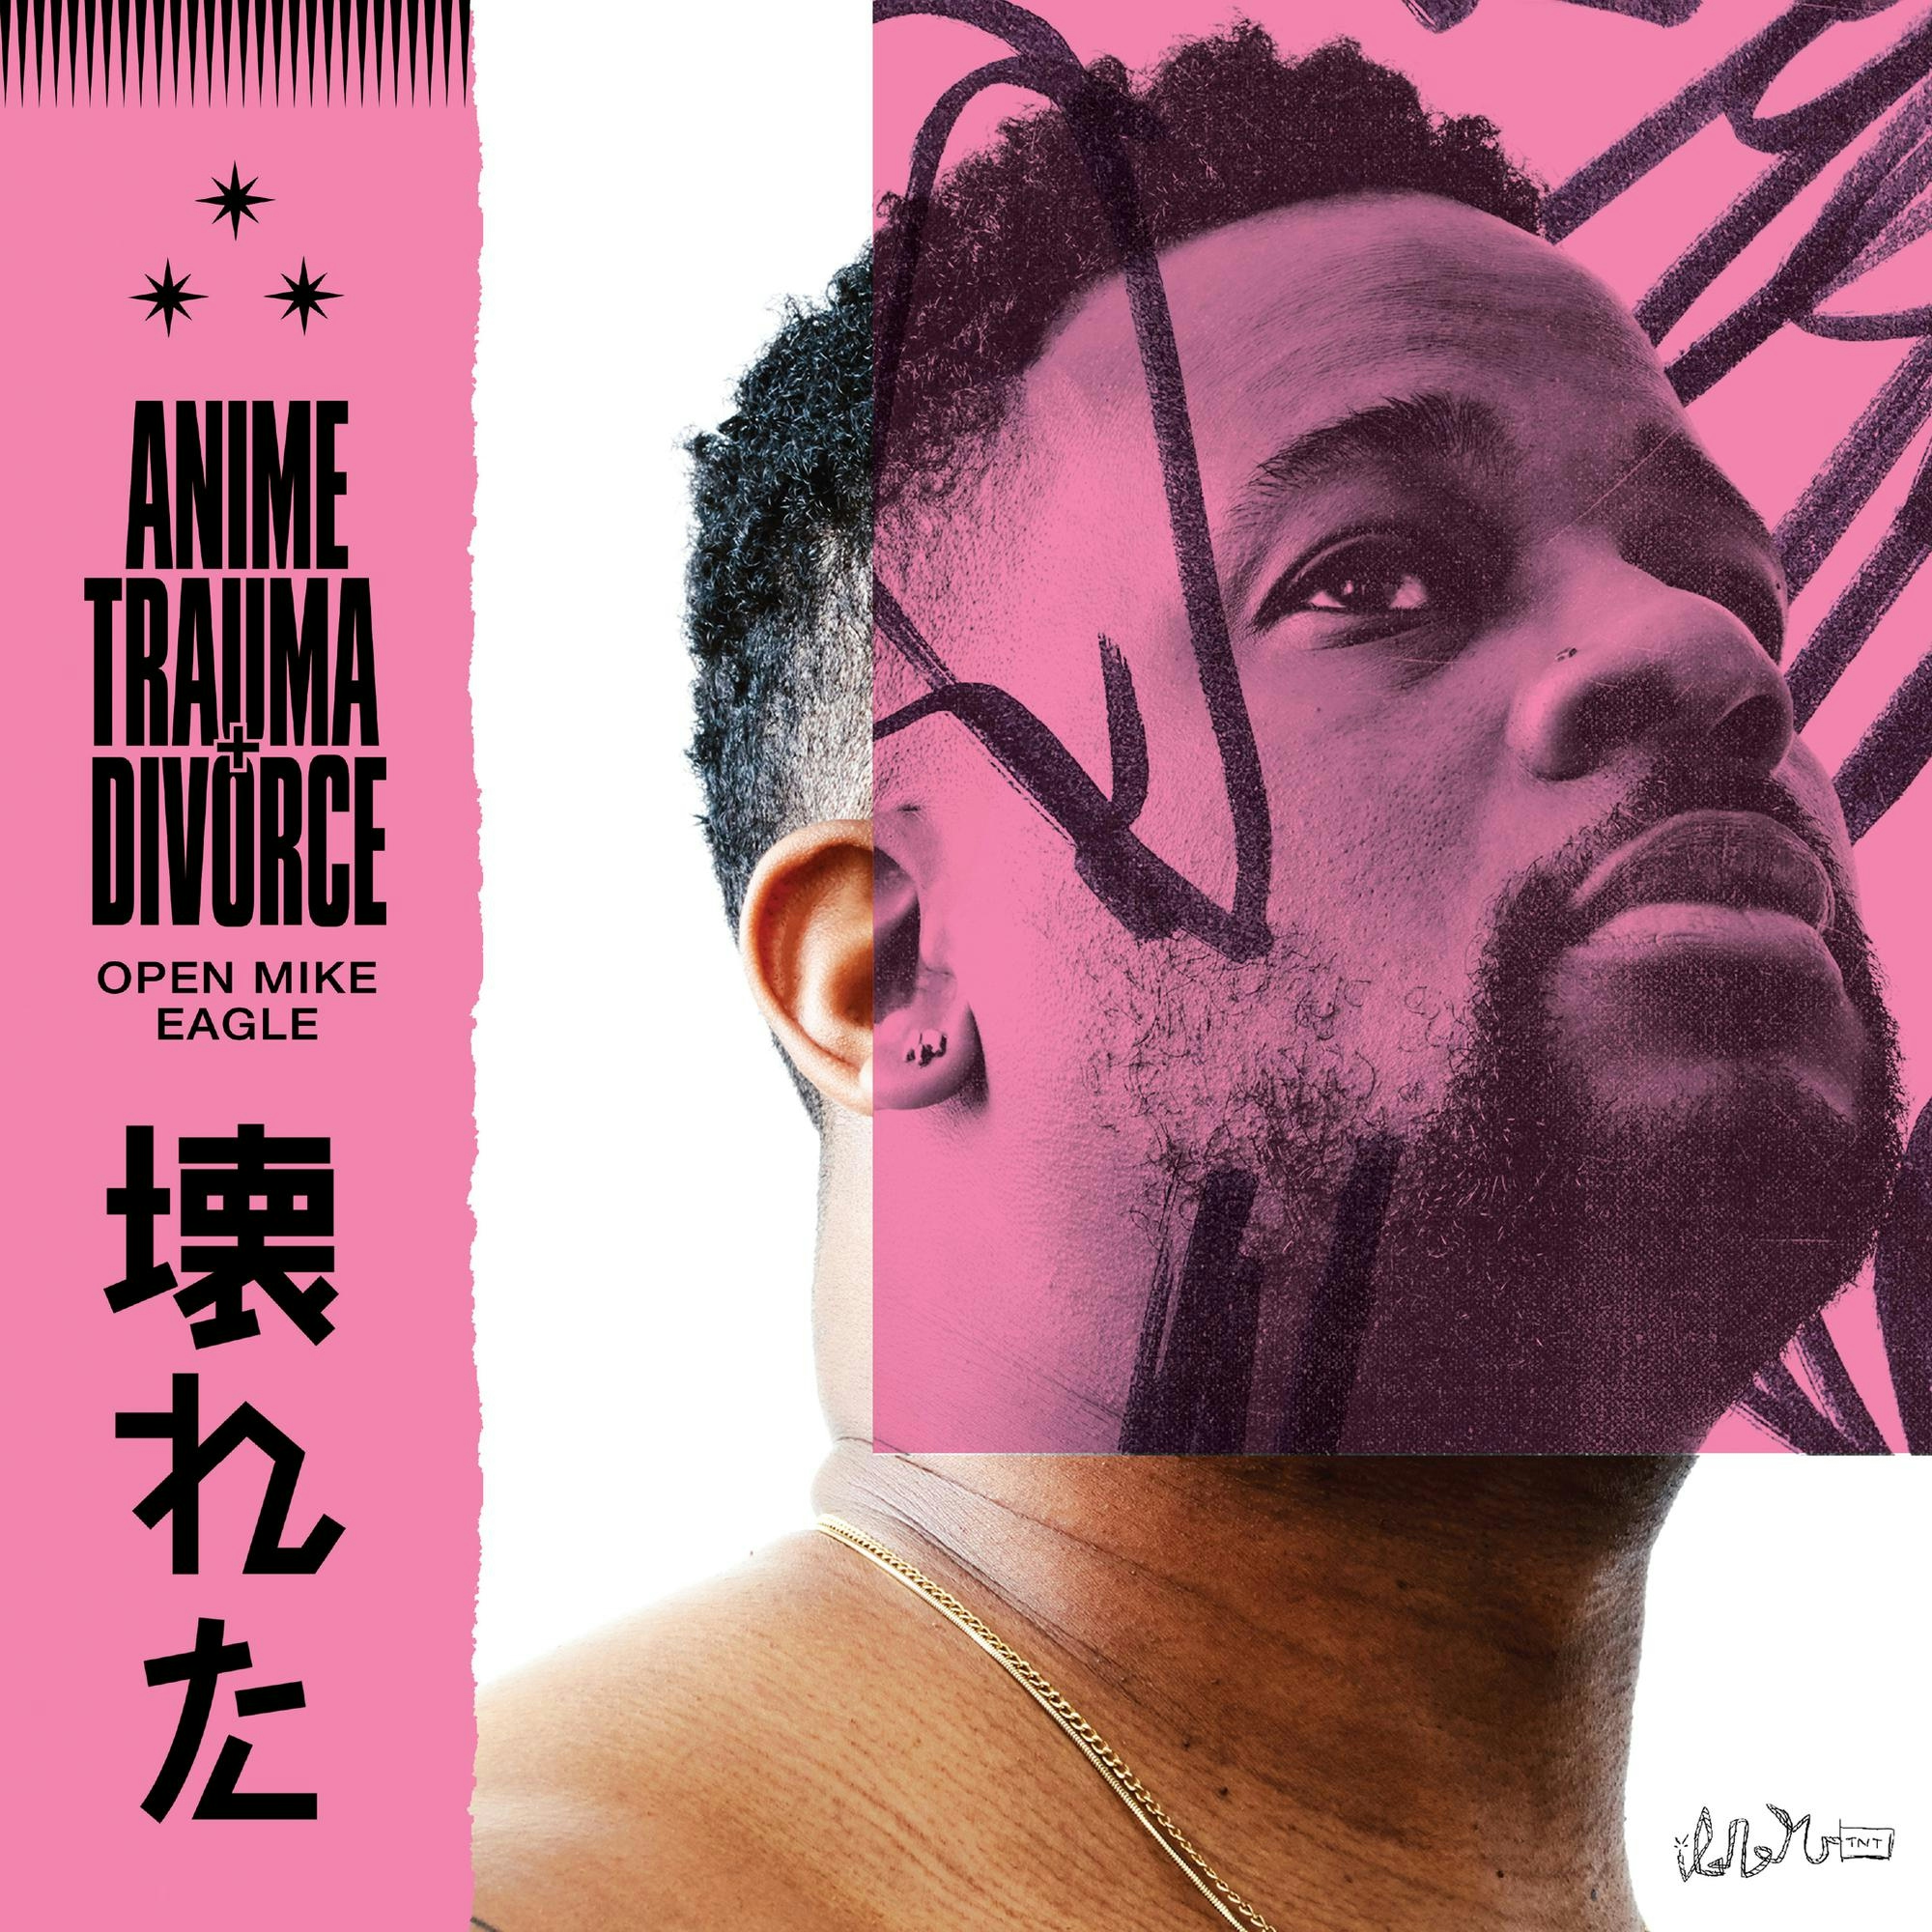 Album artwork for Anime,Trauma and Divorce by Open Mike Eagle